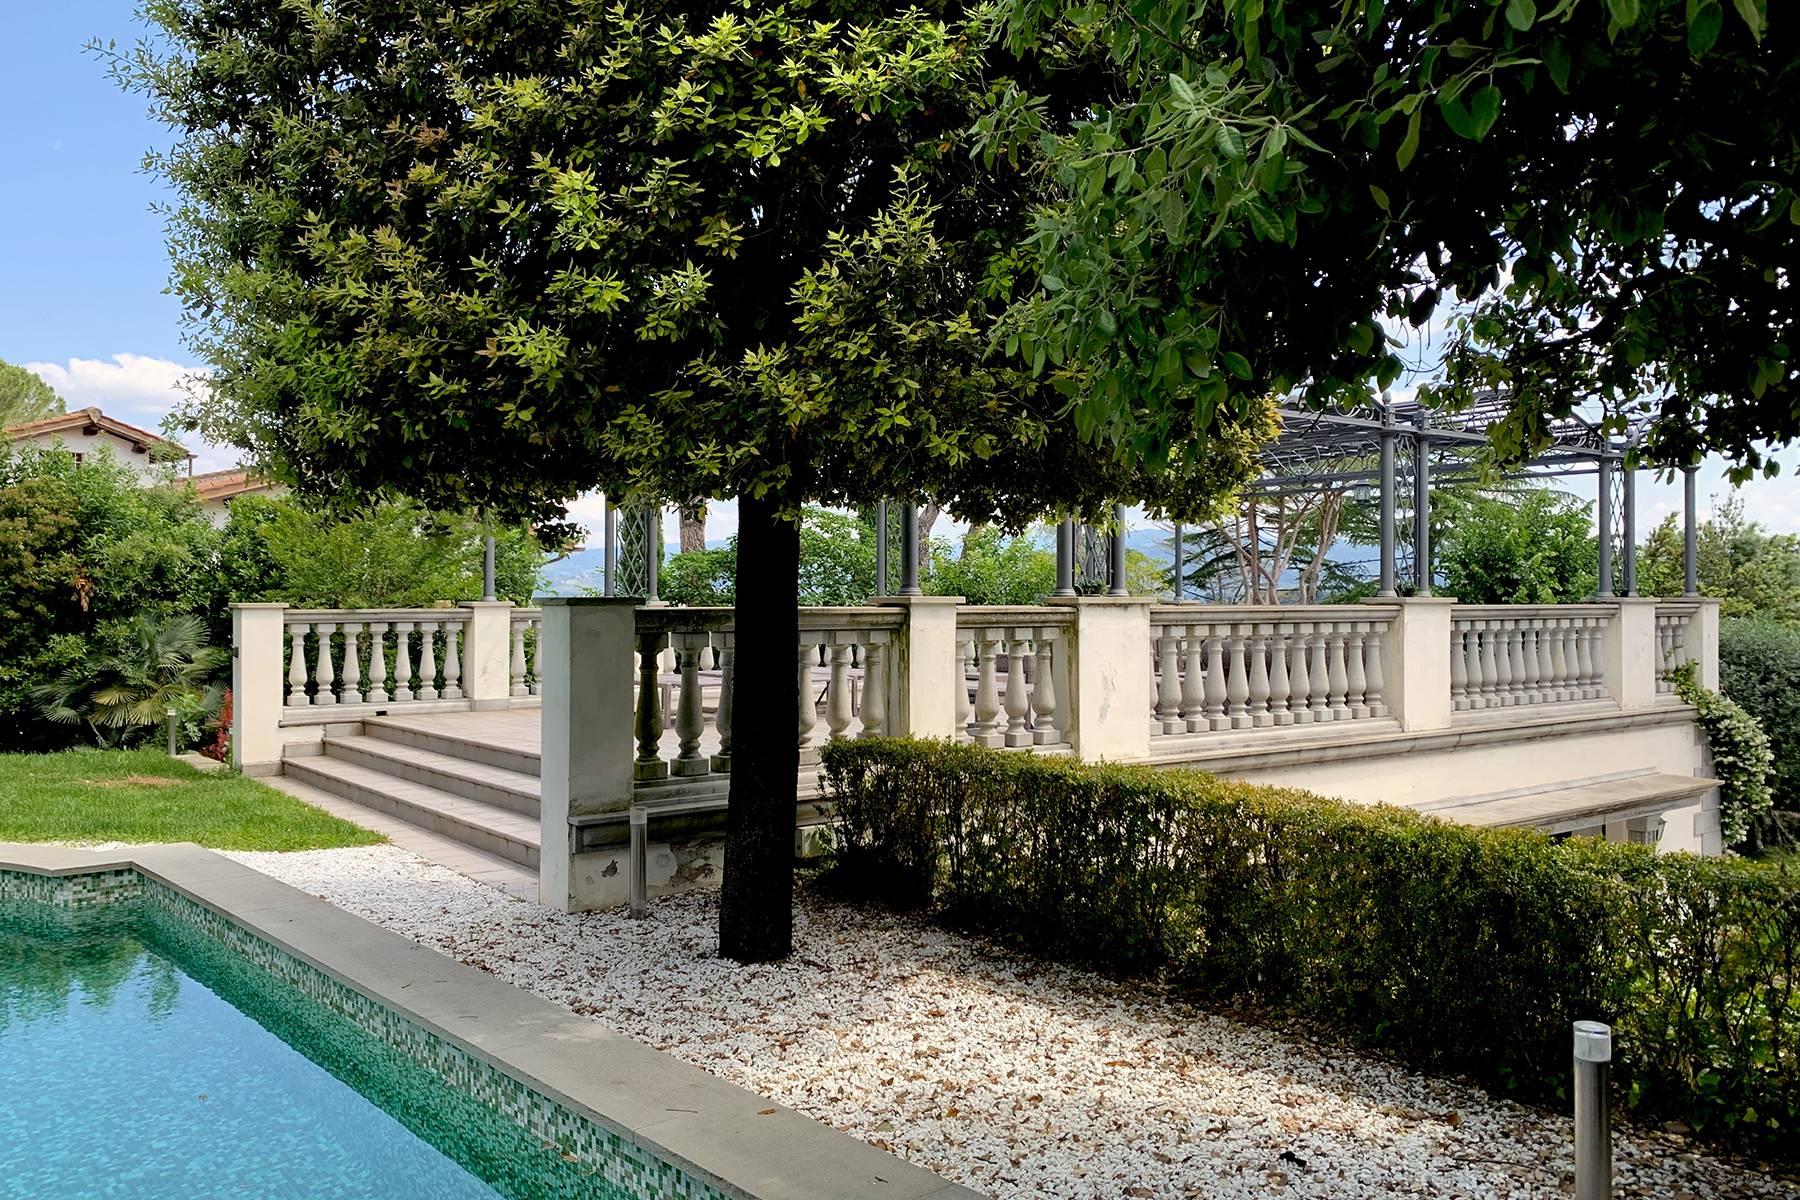 Splendid villa with pool on the Poggio Imperiale hill in Florence - 8